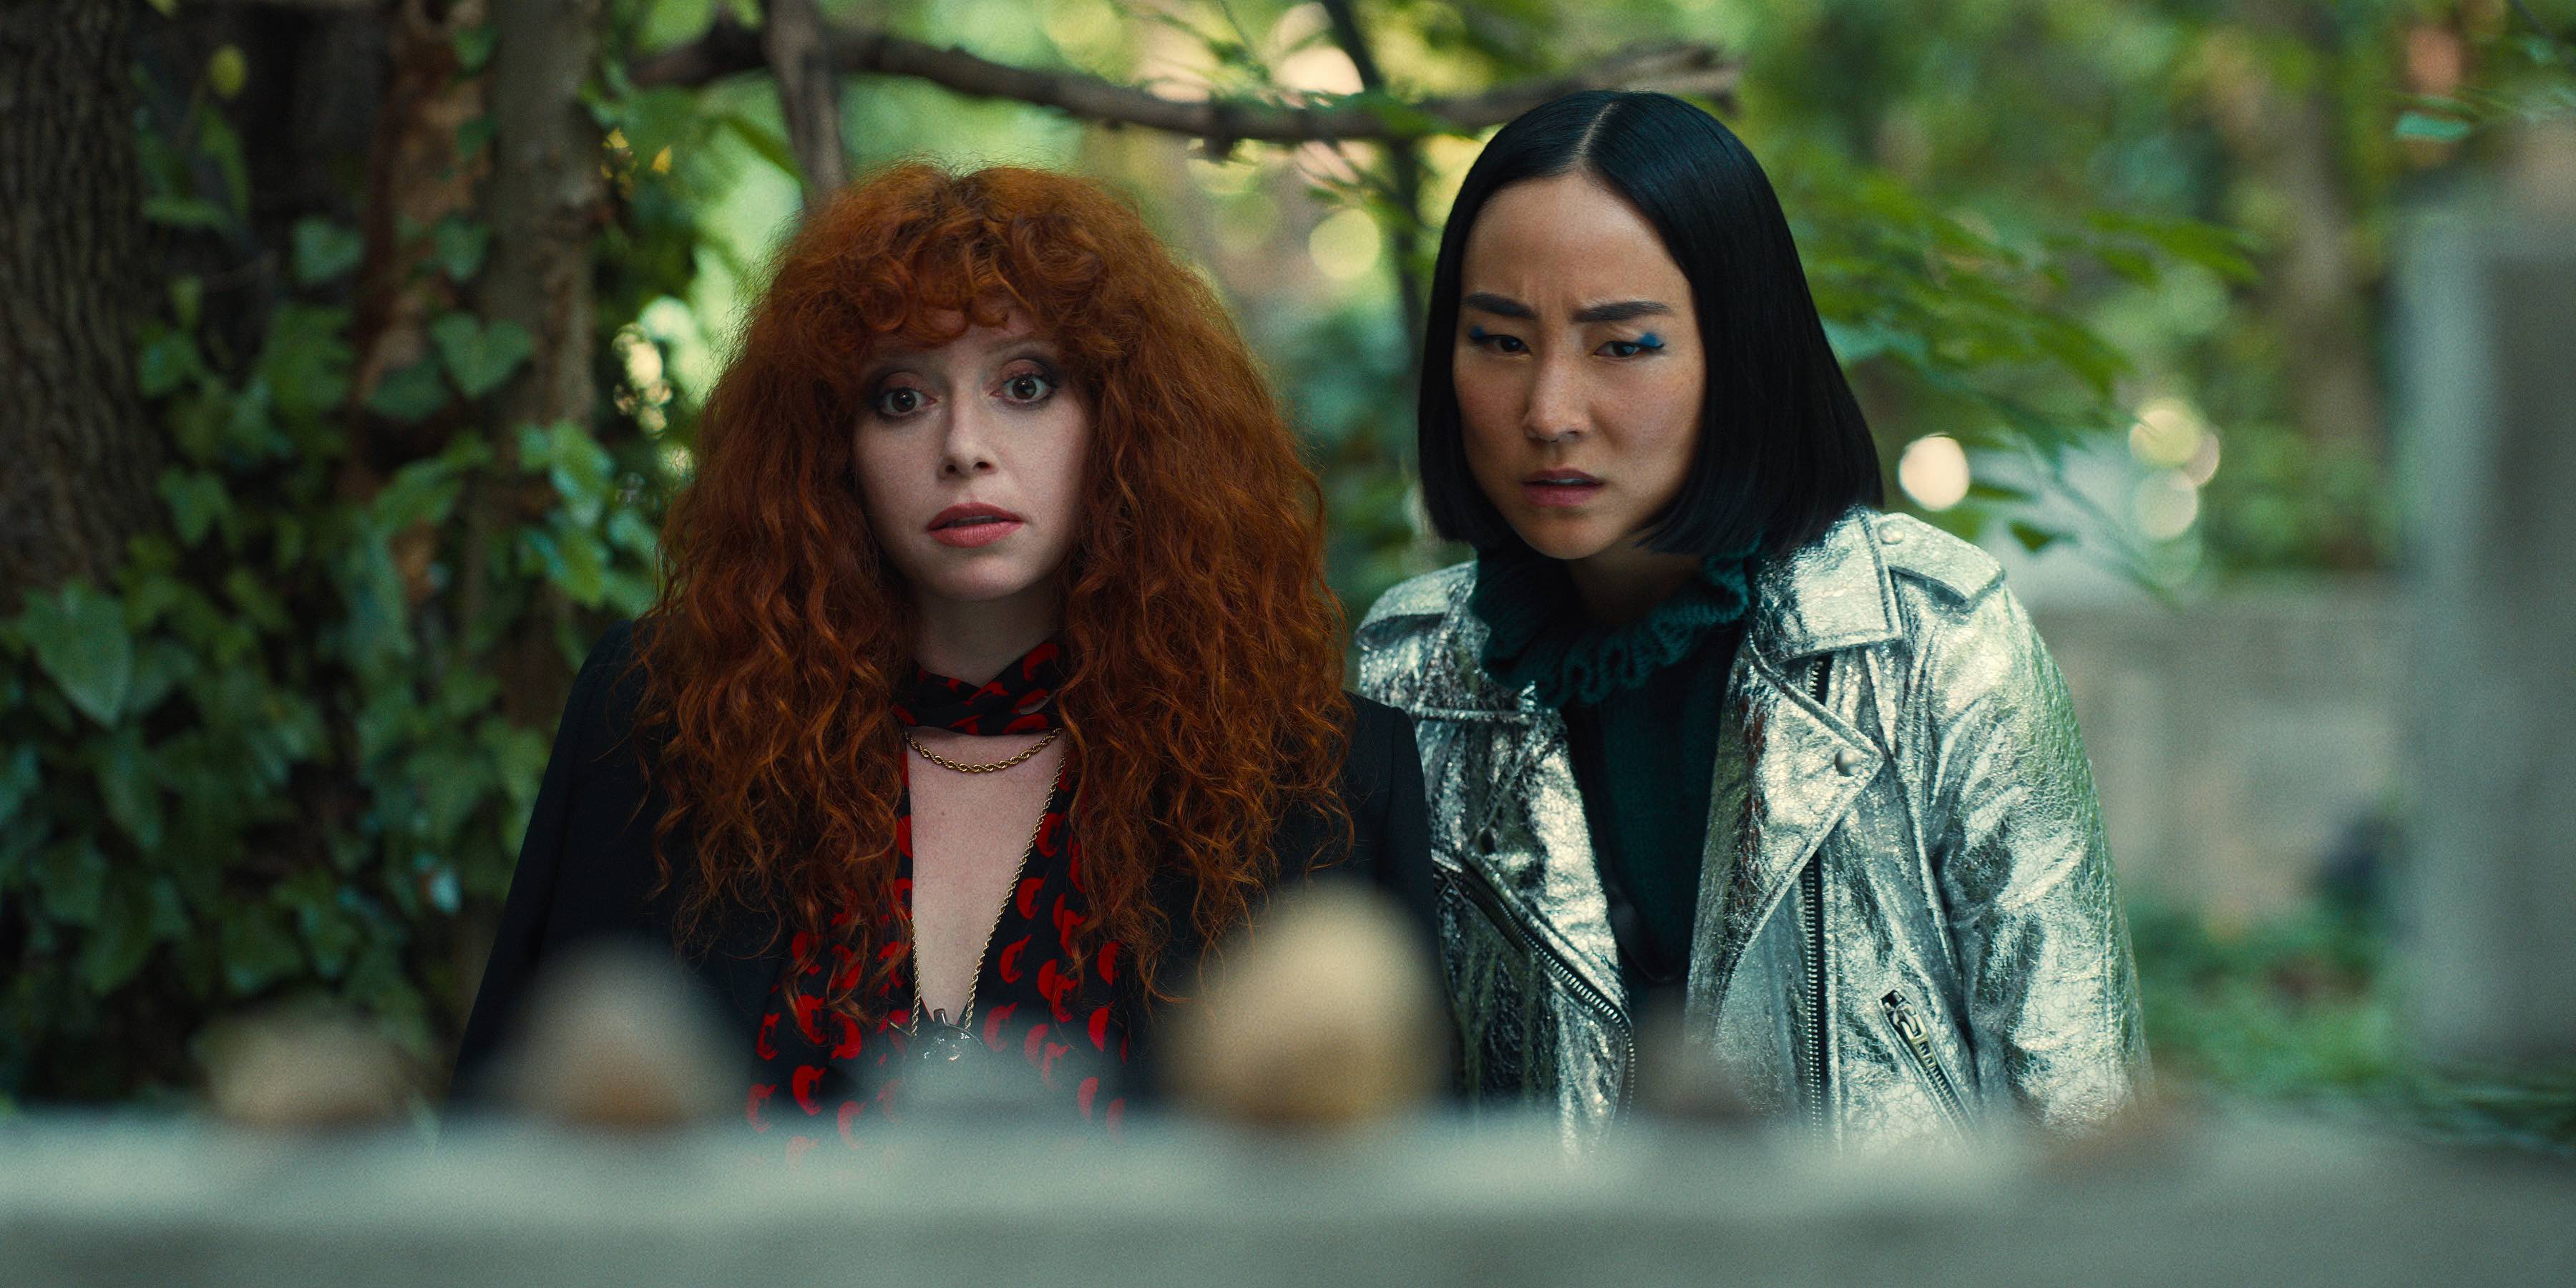 Russian Doll Soundtrack on Netflix - Every Song in Season 2, Episode 4